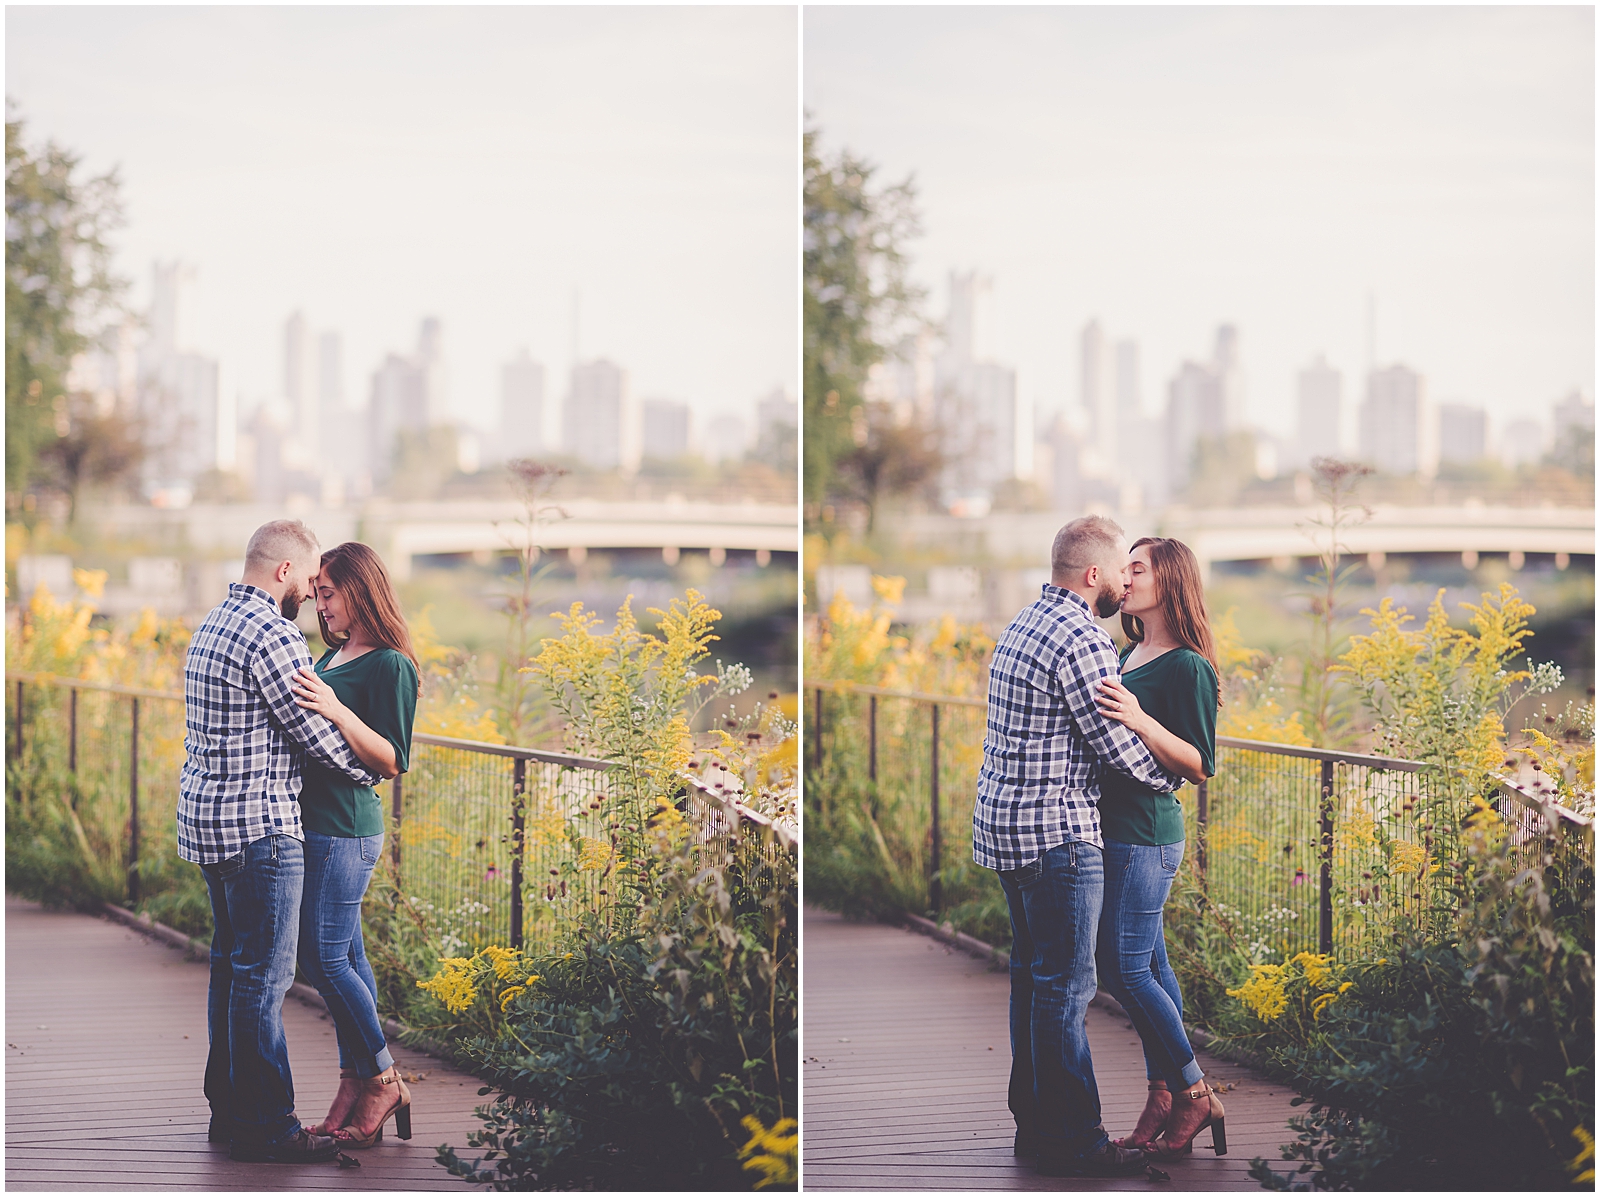 Colleen and Joel's Lincoln Park Nature Boardwalk engagement session in Chicago, Illinois with Chicagoland wedding photographer Kara Evans Photographer.